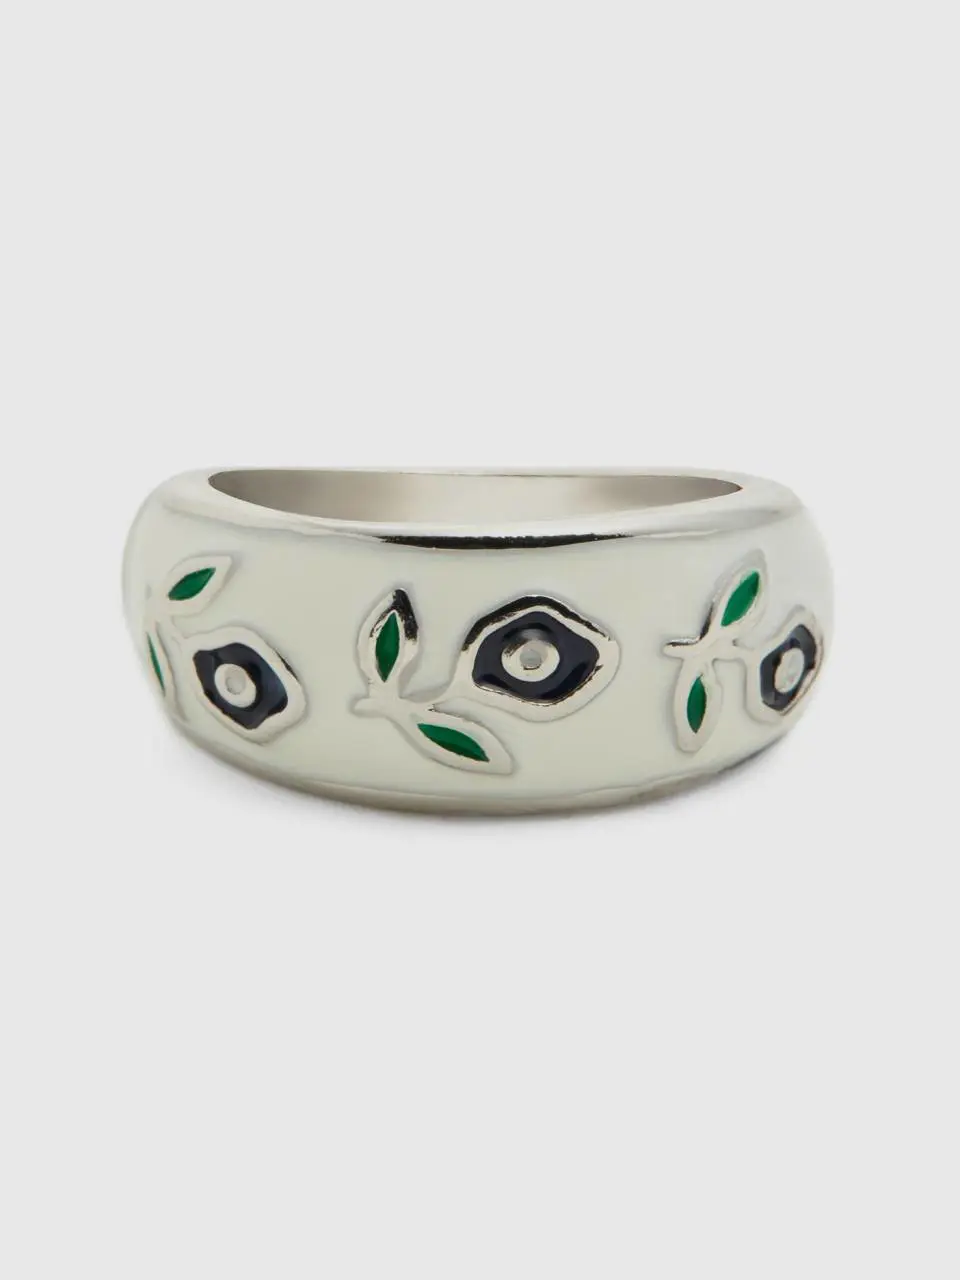 Benetton white band ring with dark blue flowers. 1